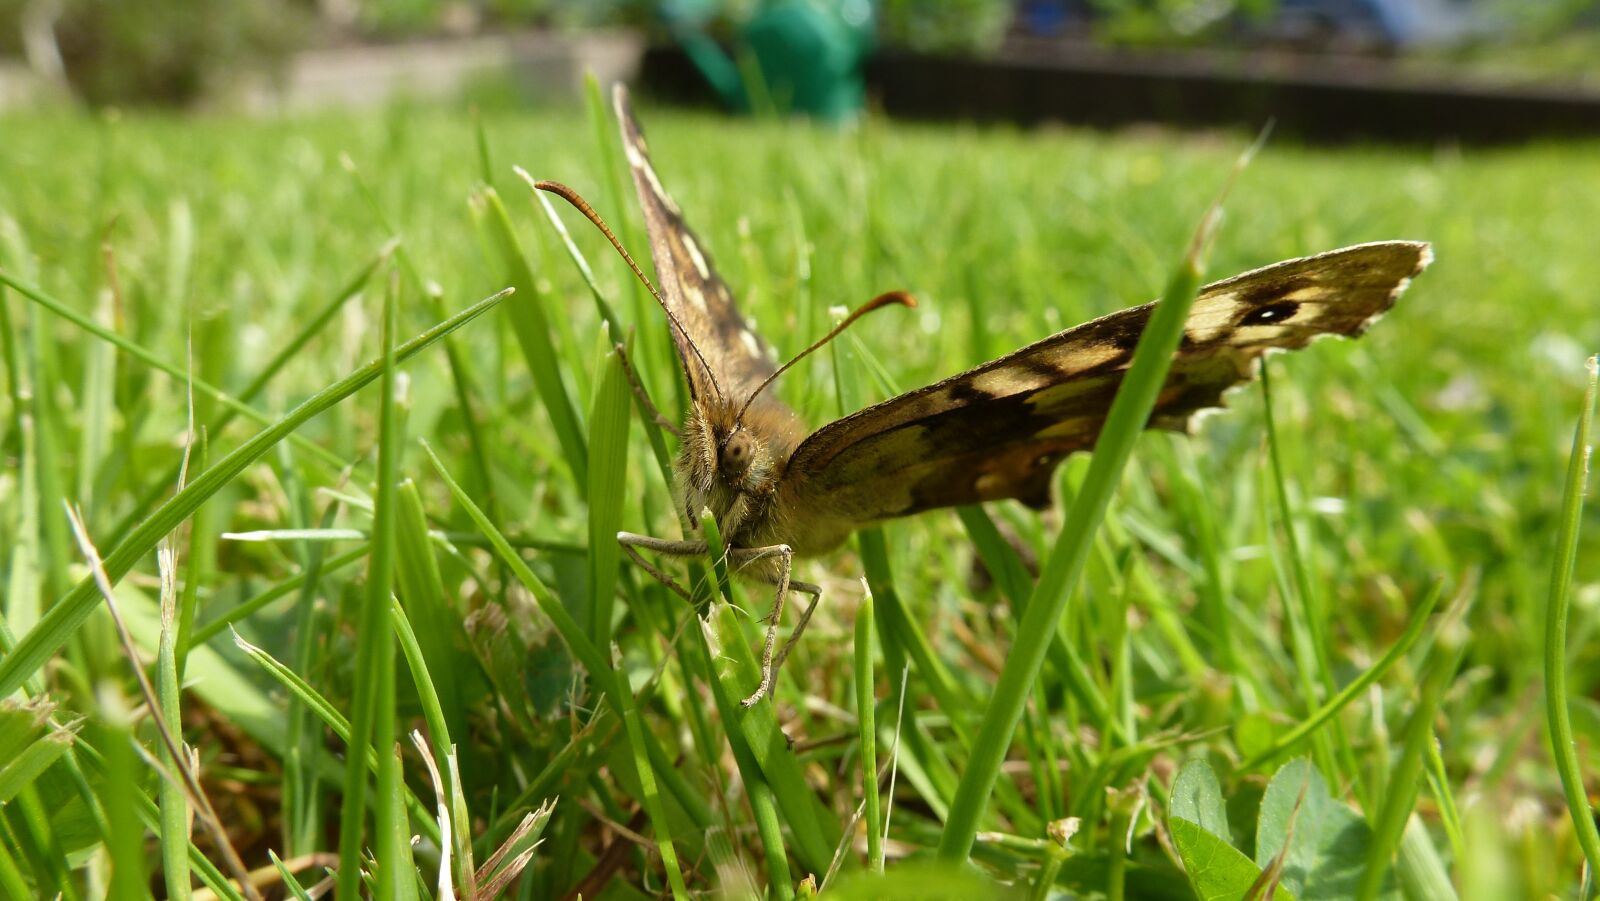 Panasonic DMC-TZ19 sample photo. Butterfly, creature, insect photography